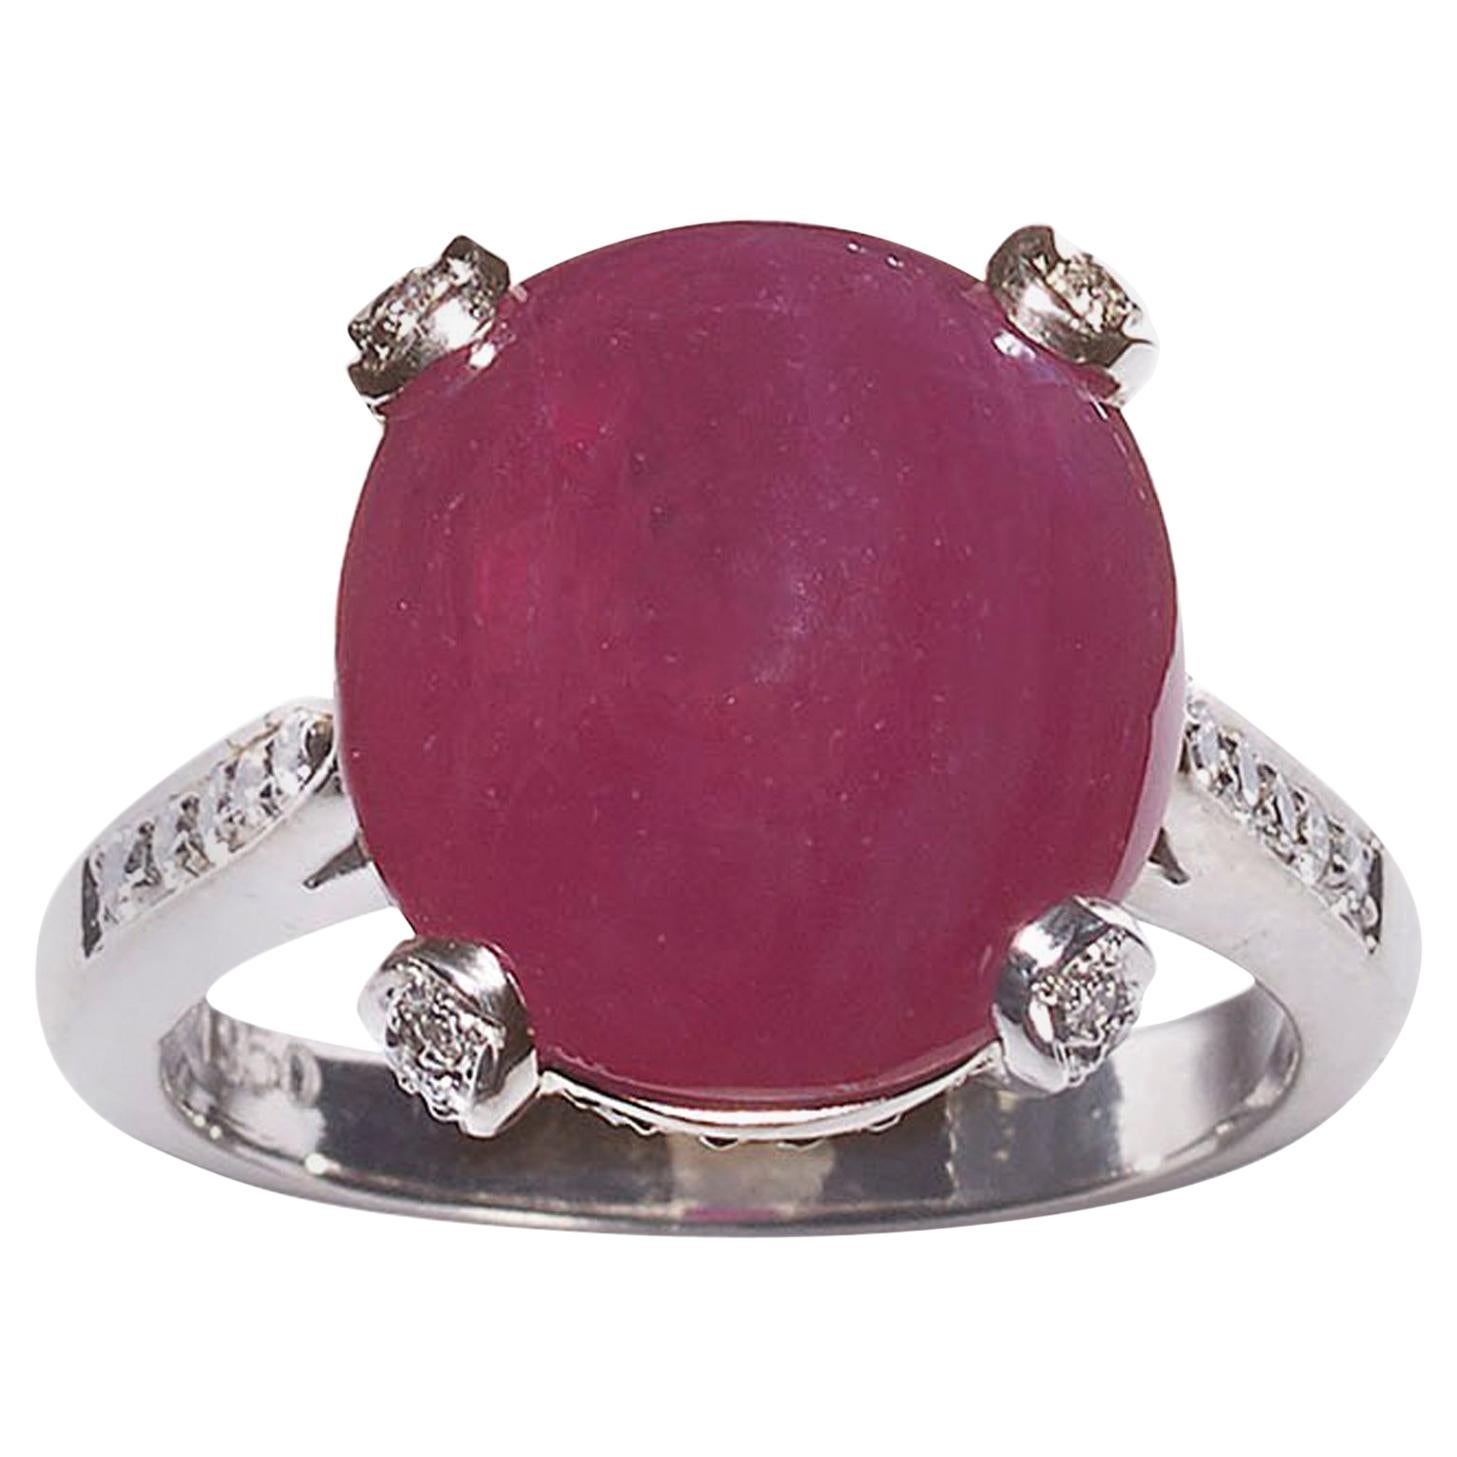 Cabochon Ruby and Diamond Ring